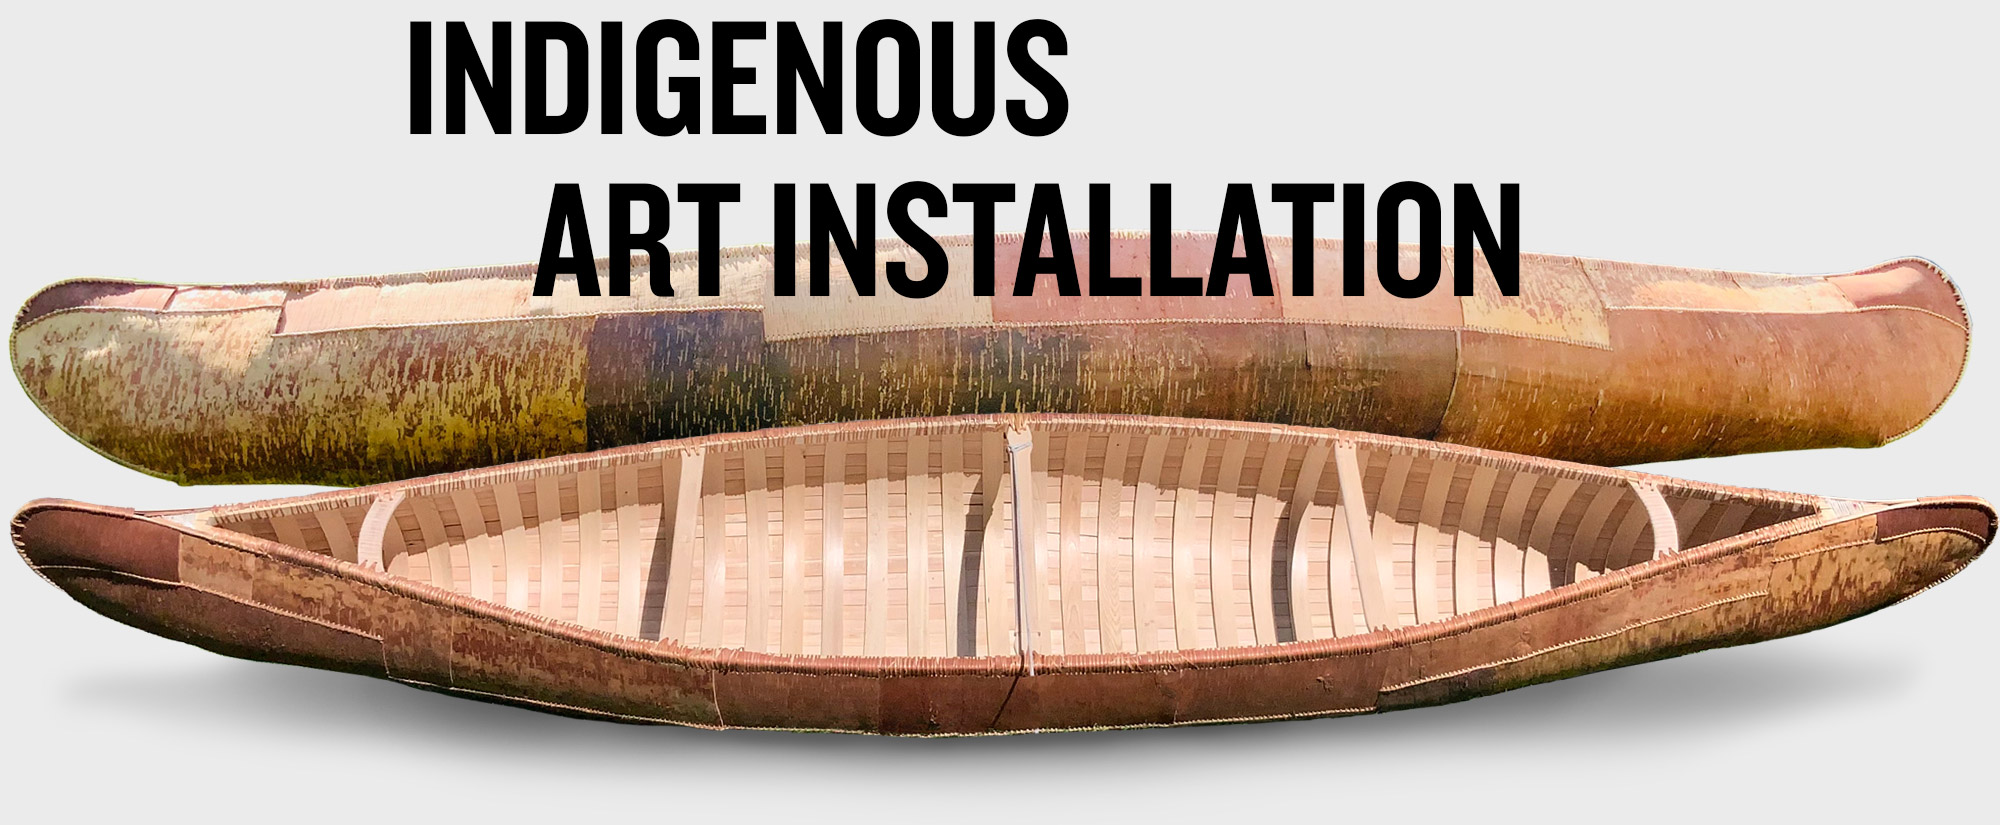 Indigenous Art Installation title with image of two finished canoes